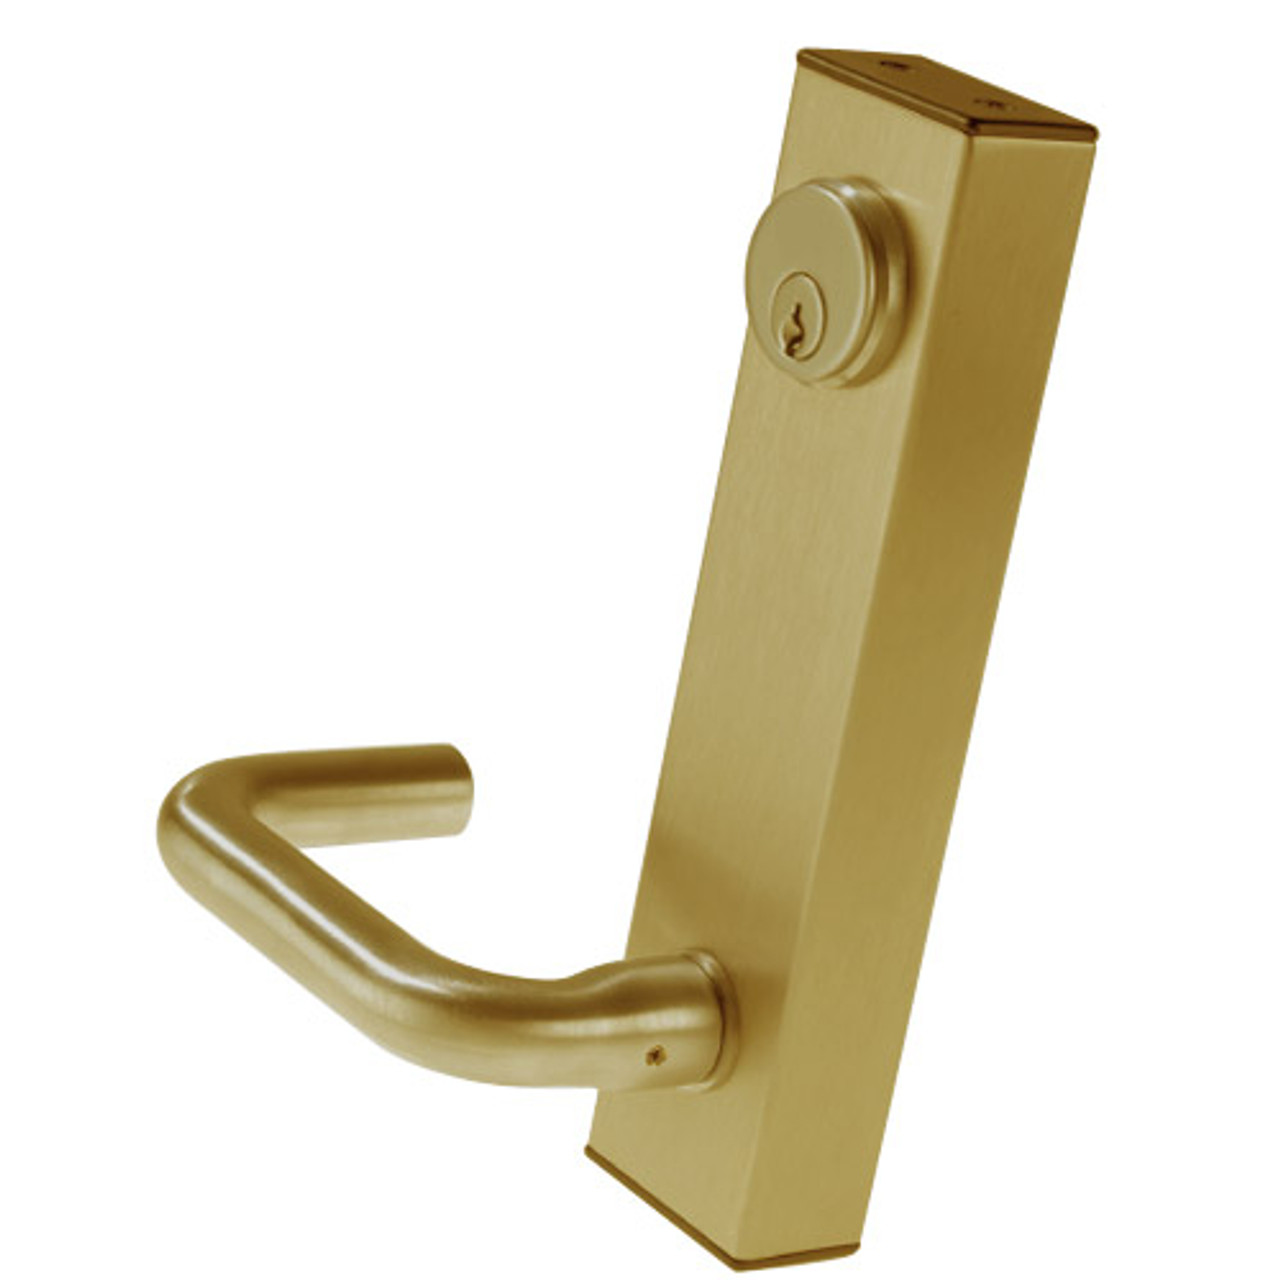 3080E-02-0-33-30 US4 Adams Rite Electrified Entry Trim with Round Lever in Satin Brass Finish